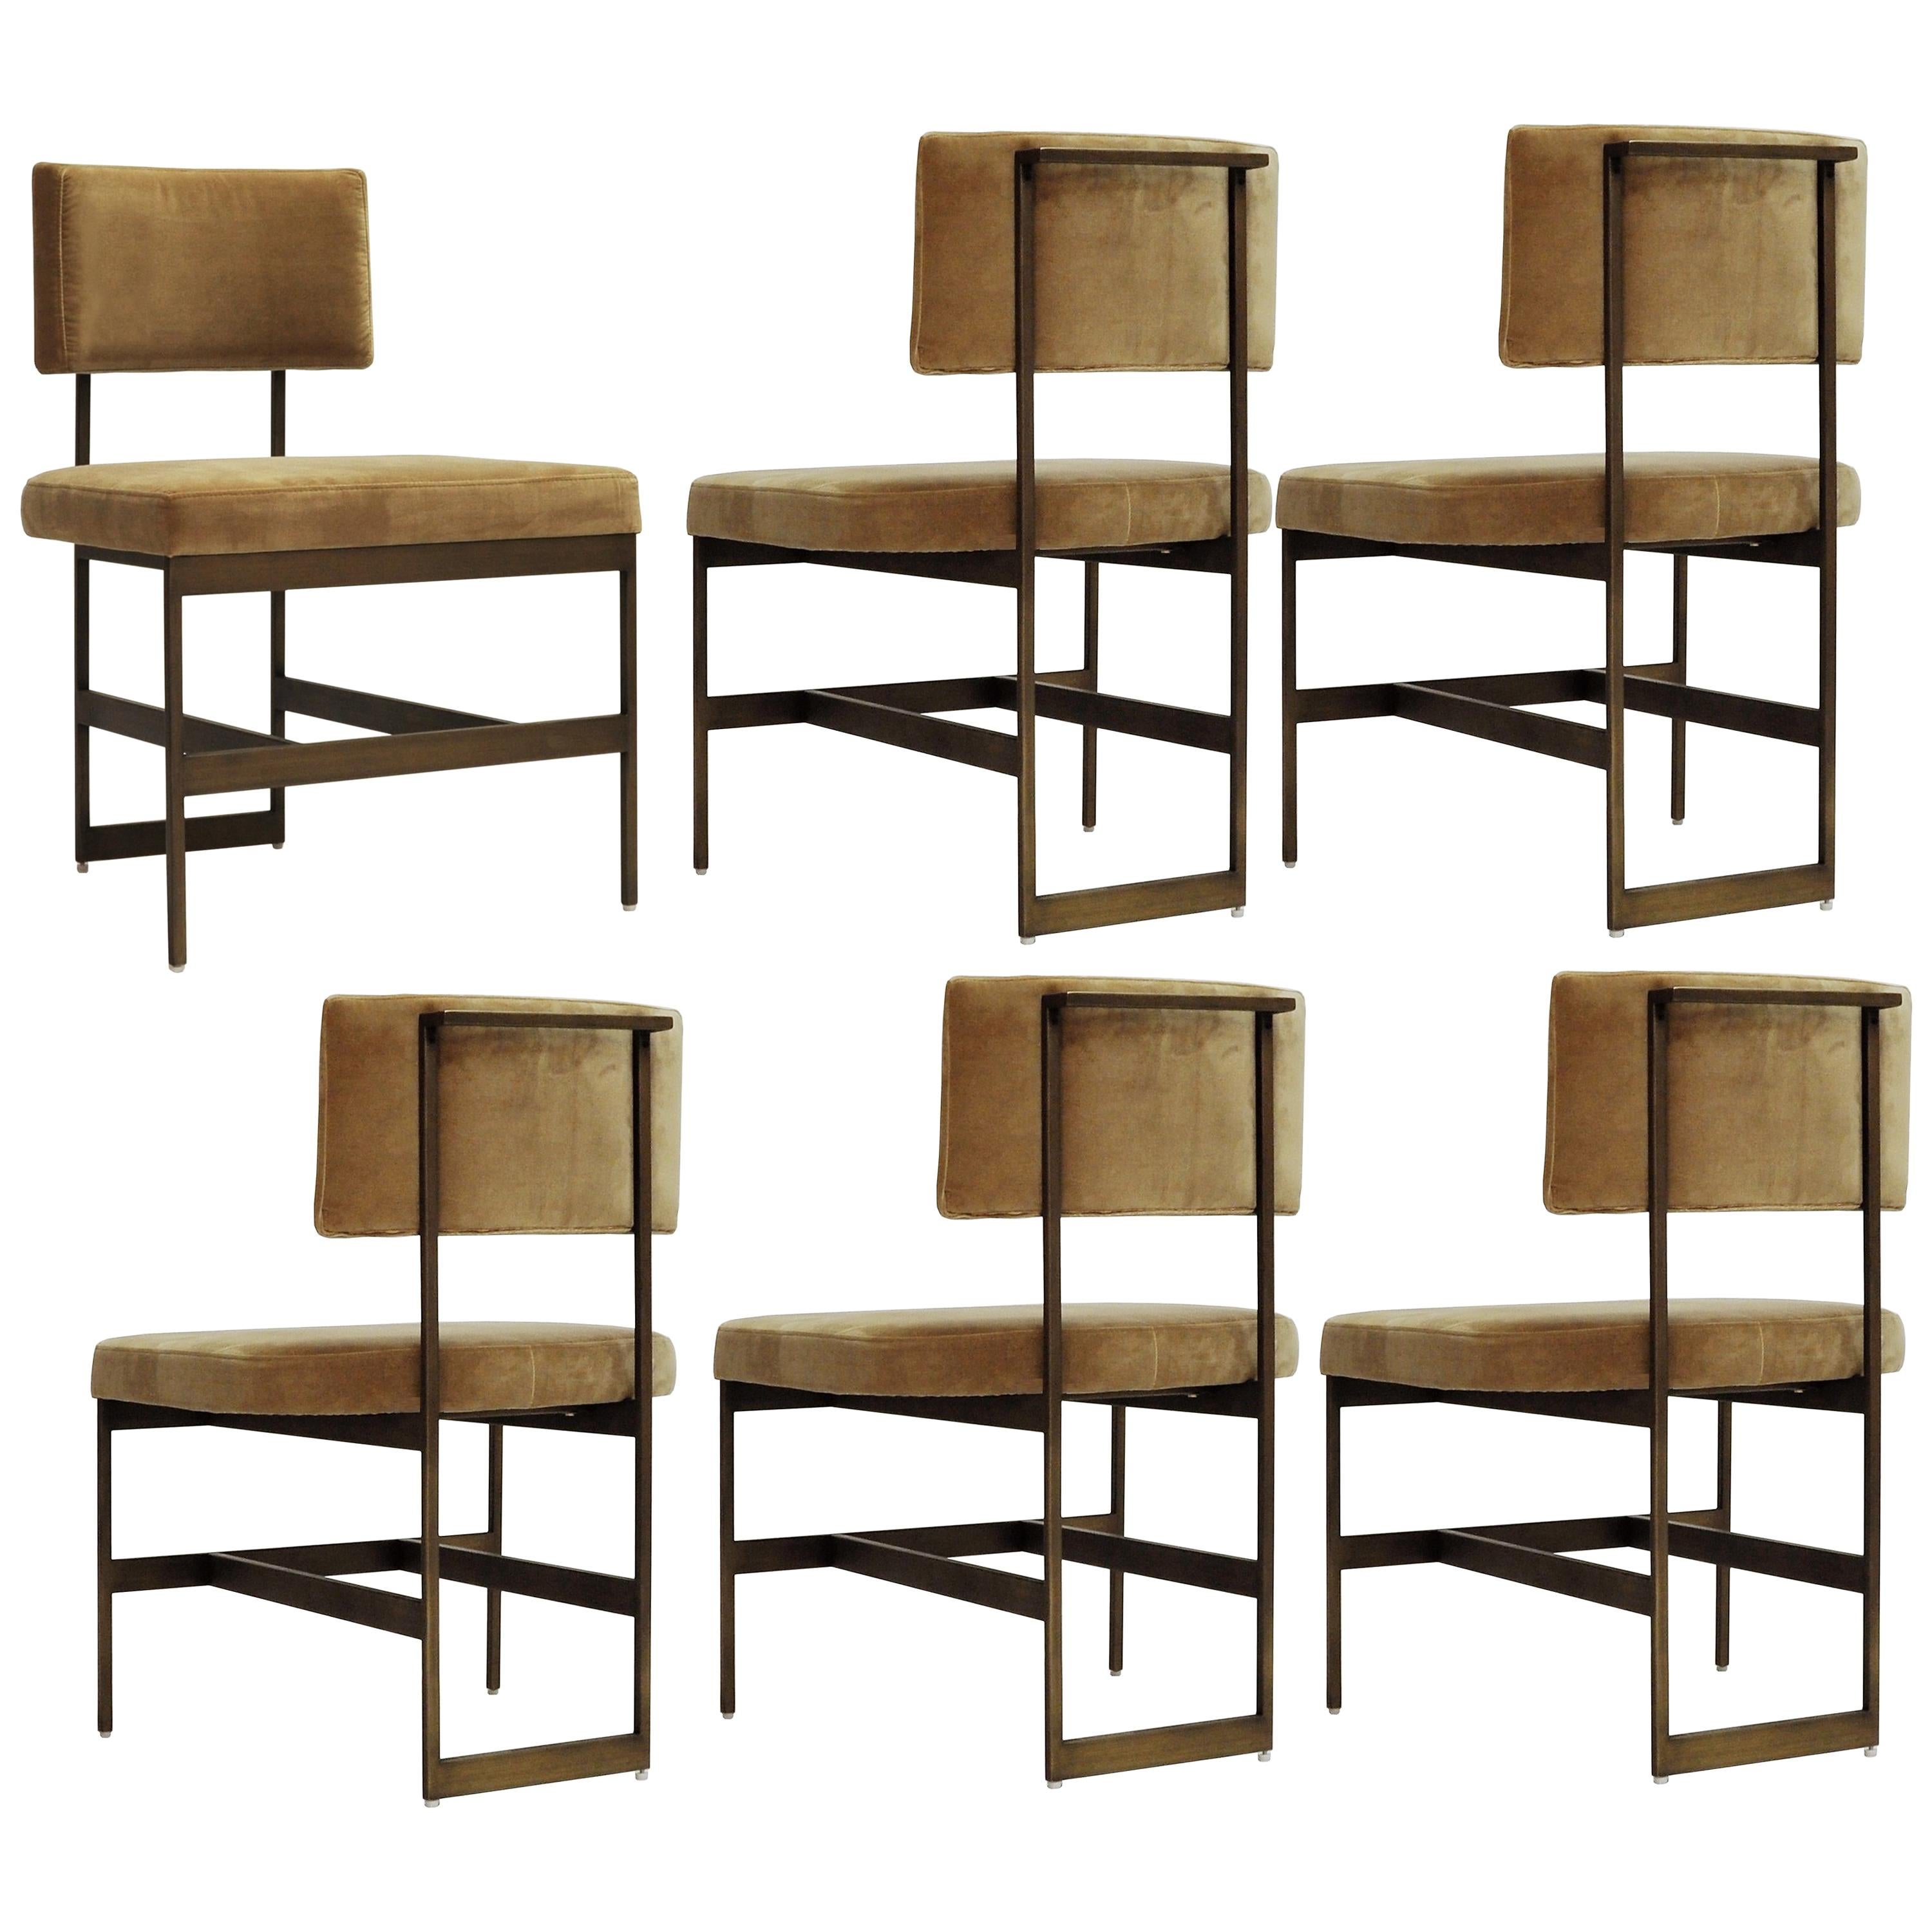 Set of 6, Mid-Century Modern Dining Chairs in Camel Velvet and Antique Bronze